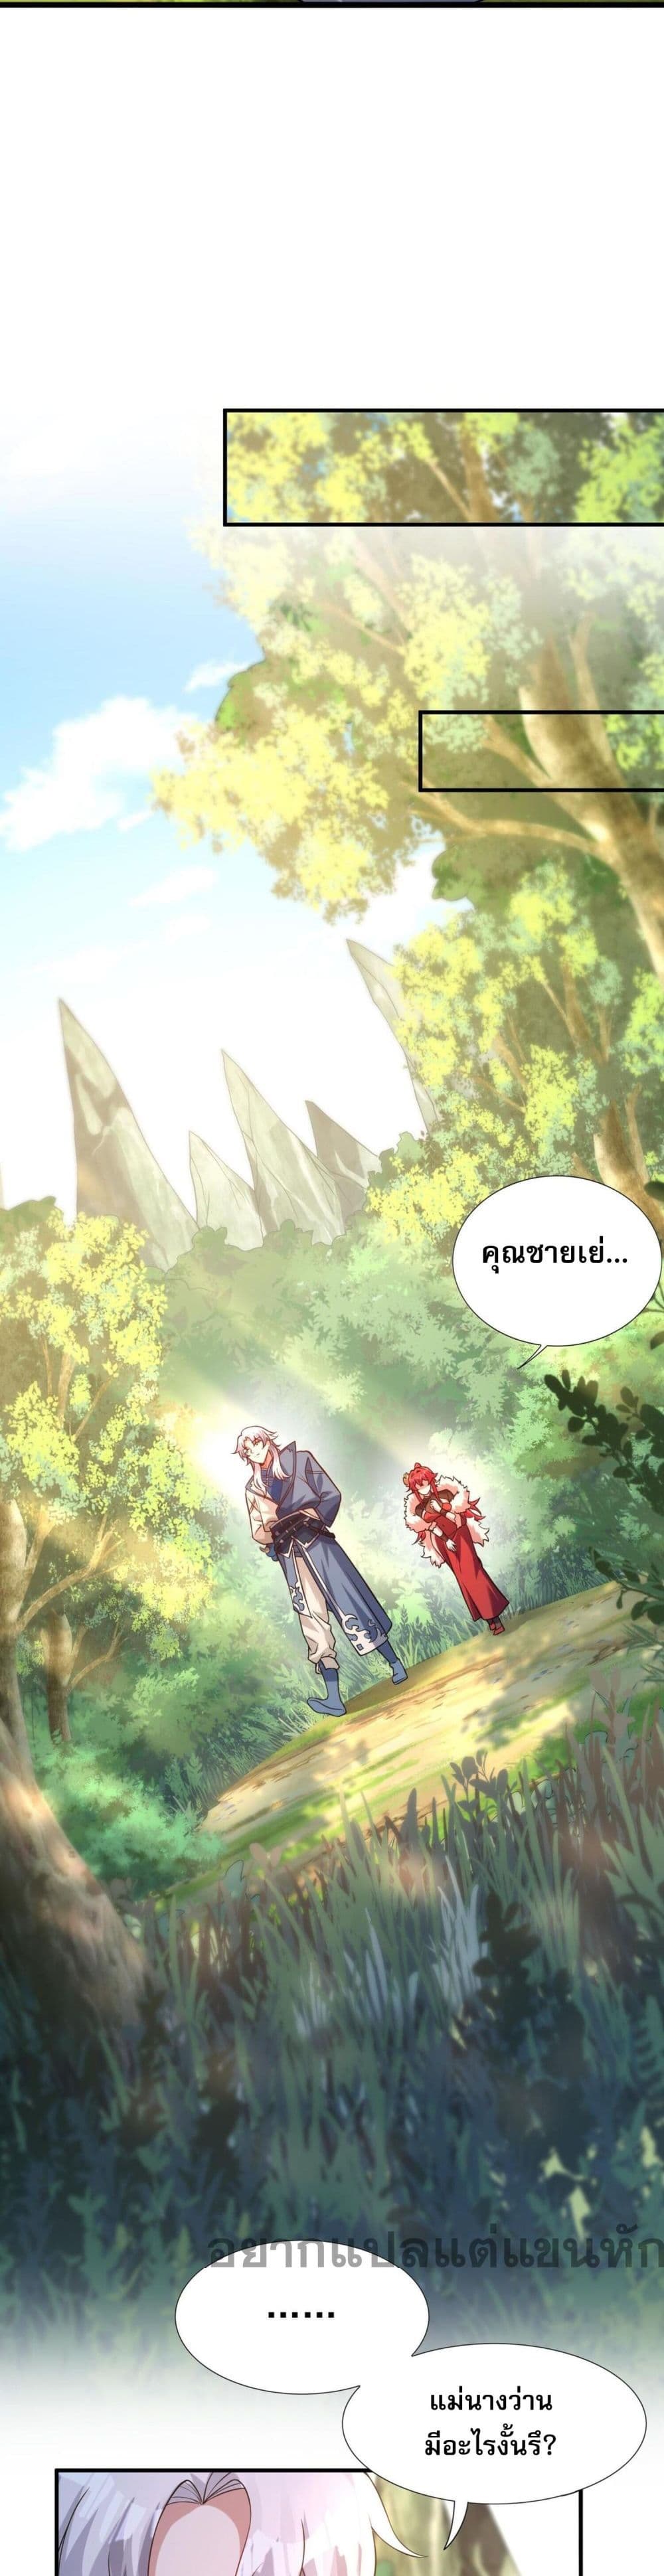 I Have Hundreds of Millions of Years of Cultivation ข้ามีพลังบำเพ็ญหนึ่งล้านปี 11-11